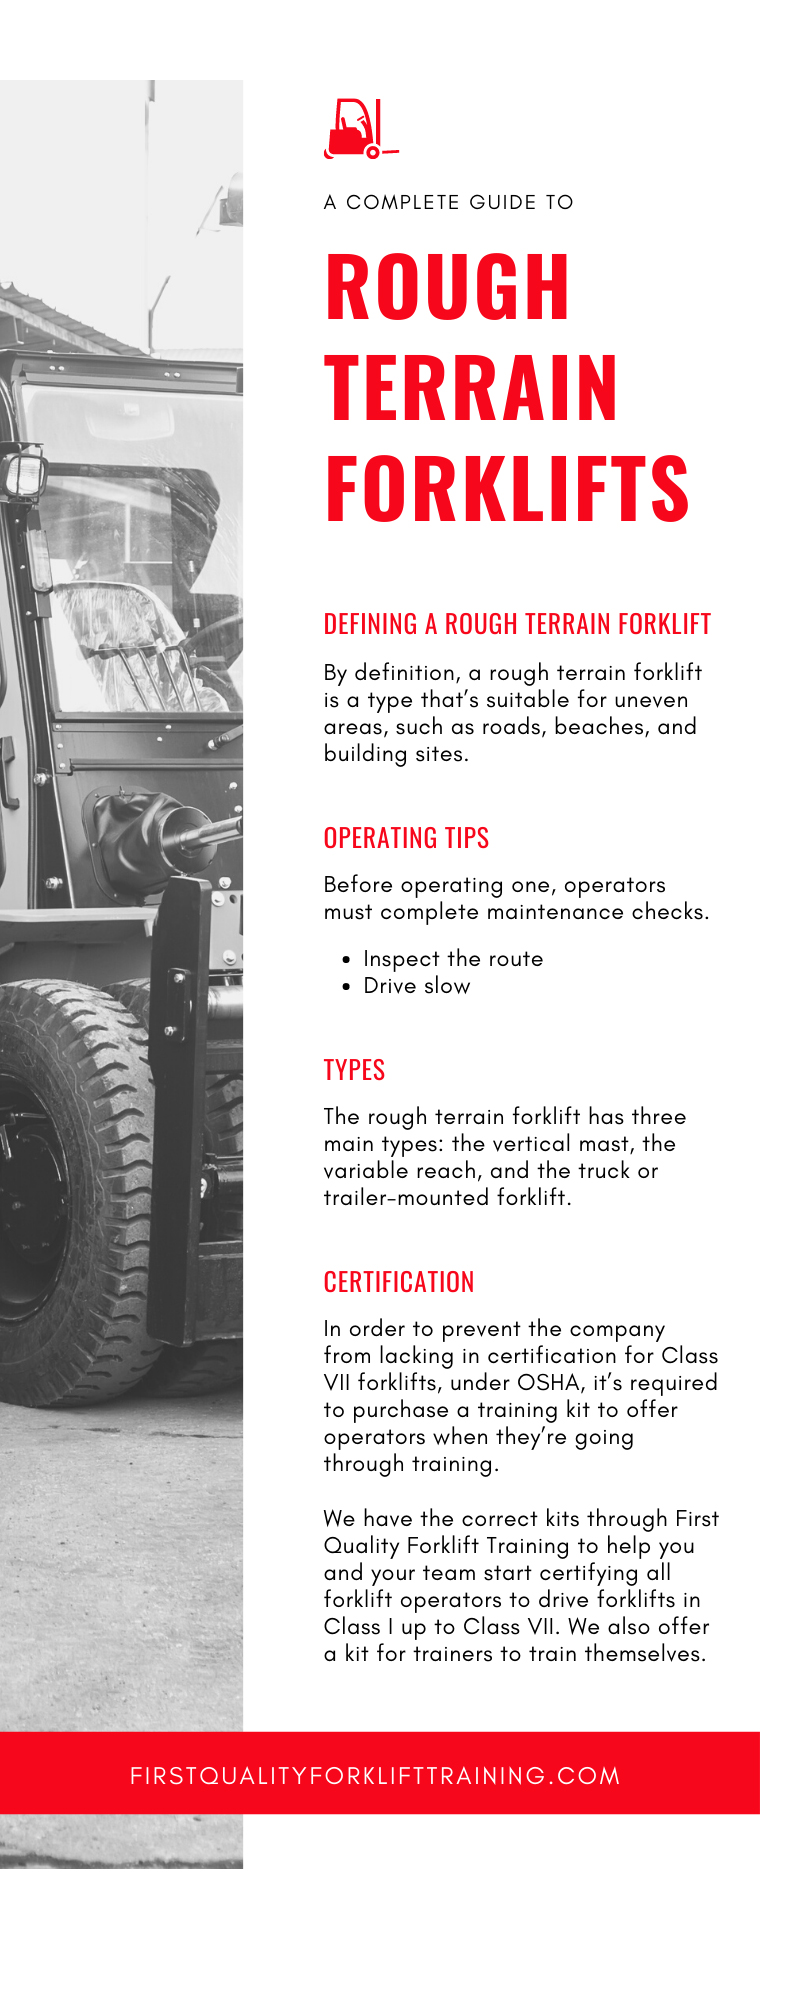 A Complete Guide To Rough Terrain Forklifts